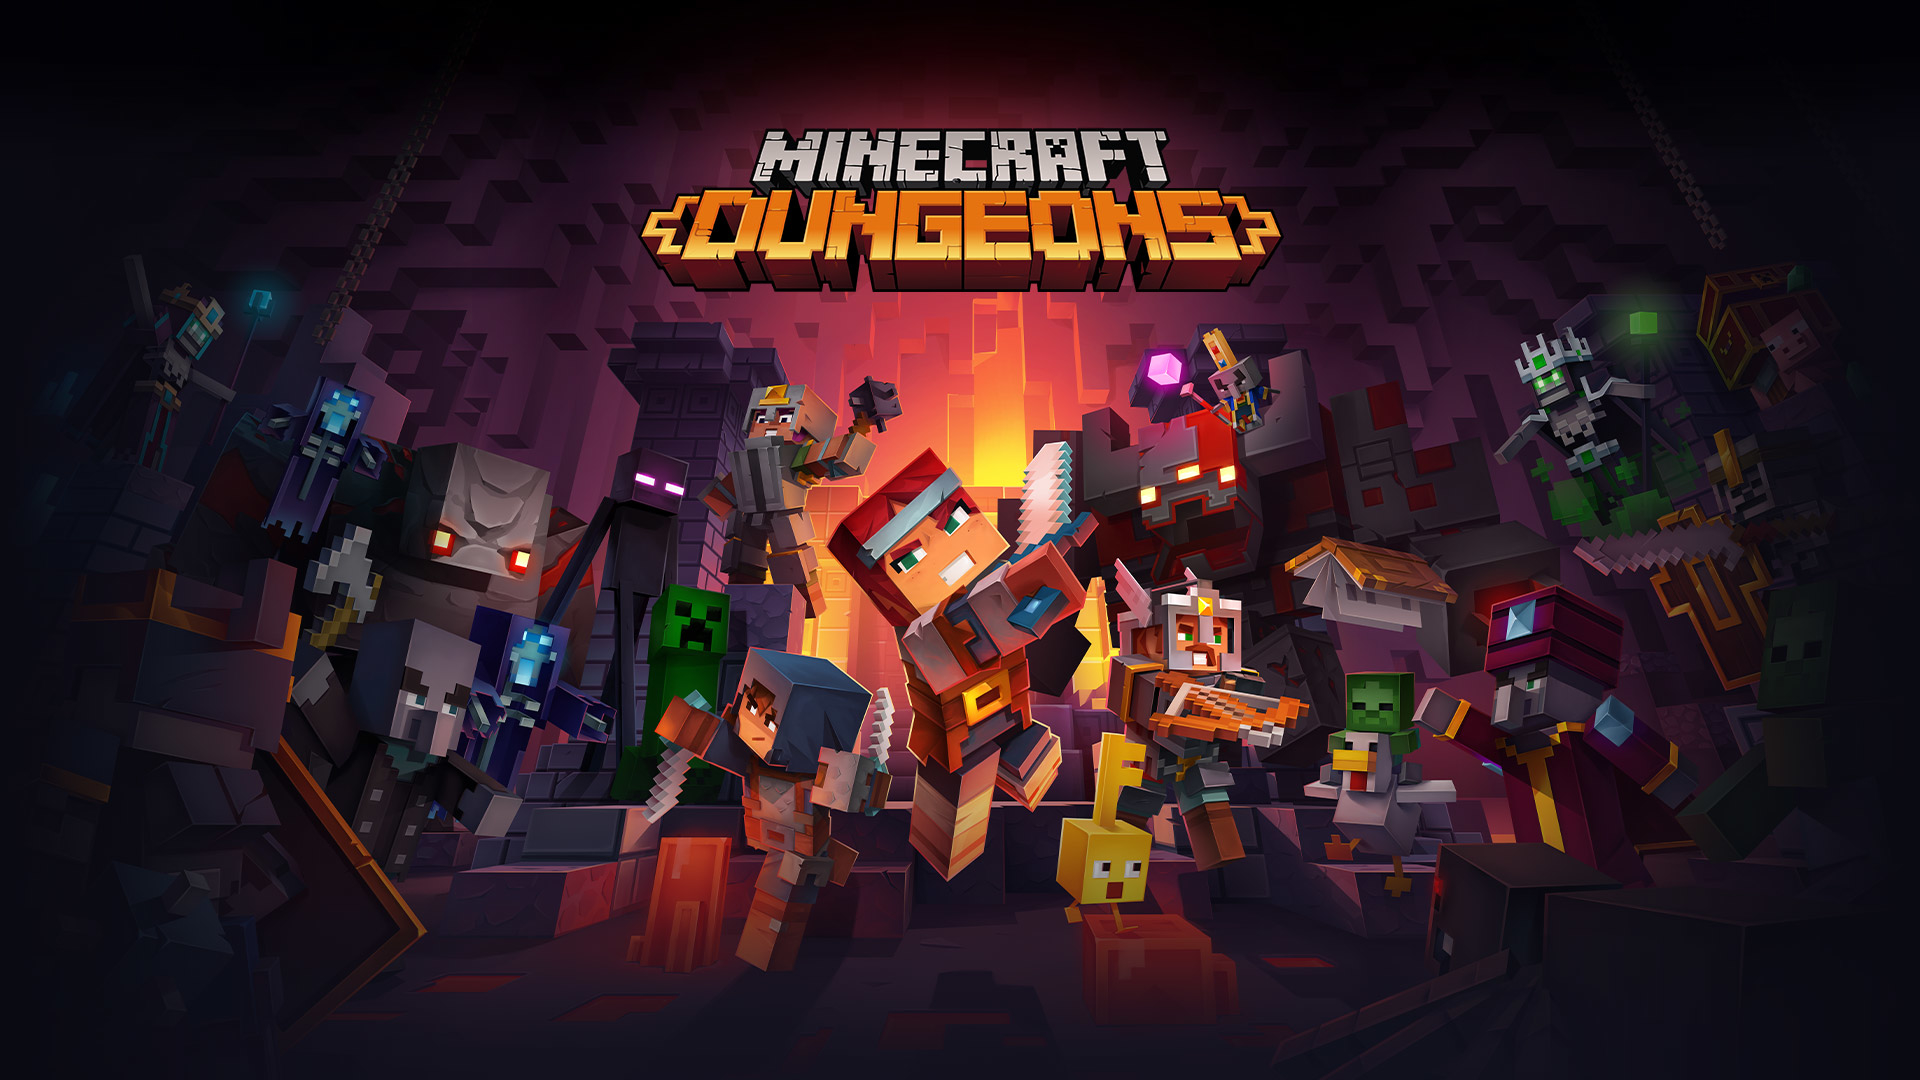 Featured image of post Minecraft Dungeons Wallpaper Pc 14 06 2020 download wallpaper minecraft dungeons minecraft 2020 games games hd 4k images backgrounds photos and pictures for desktop pc android iphones